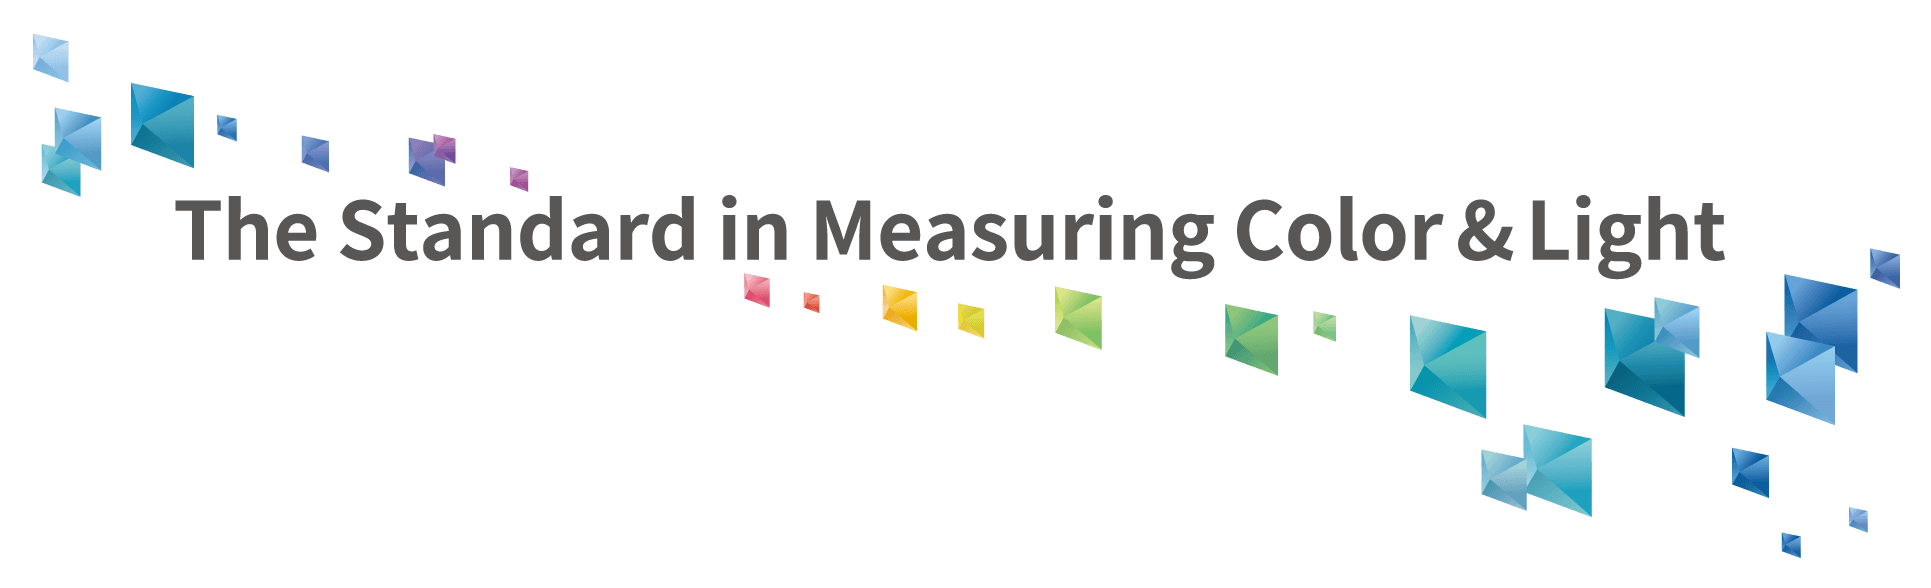 The Standard in Measuring Color ＆ Light